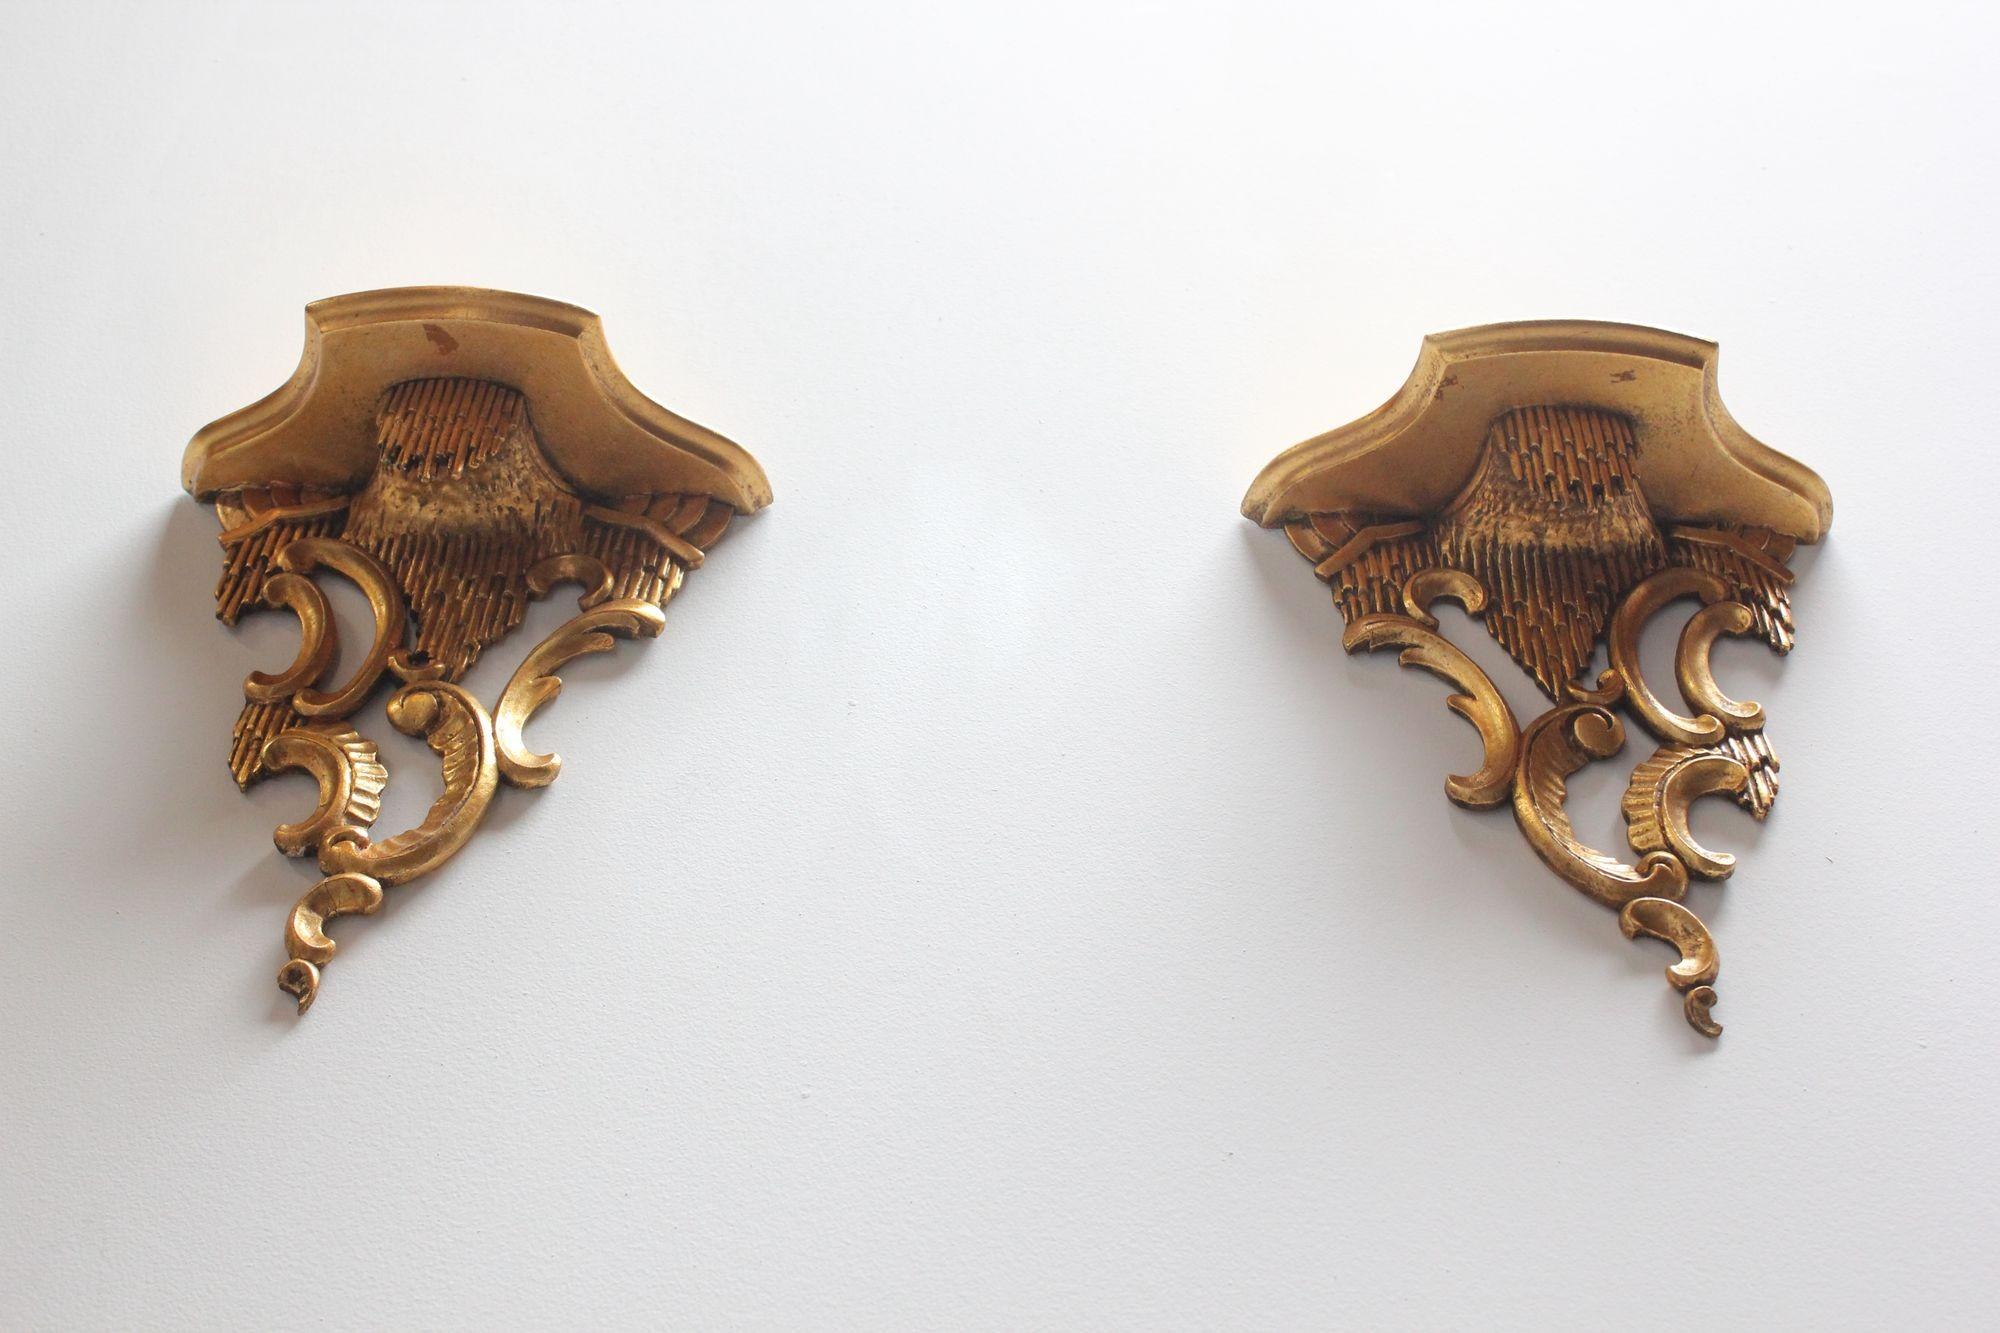 Pair of gilded Italian Rococo-style wall brackets (ca. 1950).
Deeply carved in high relief with rocaille c scroll accents and acanthus leaf decoration supporting shallow shelf surfaces. Each bracket has two hooks for hanging.
Minor gilt loss /